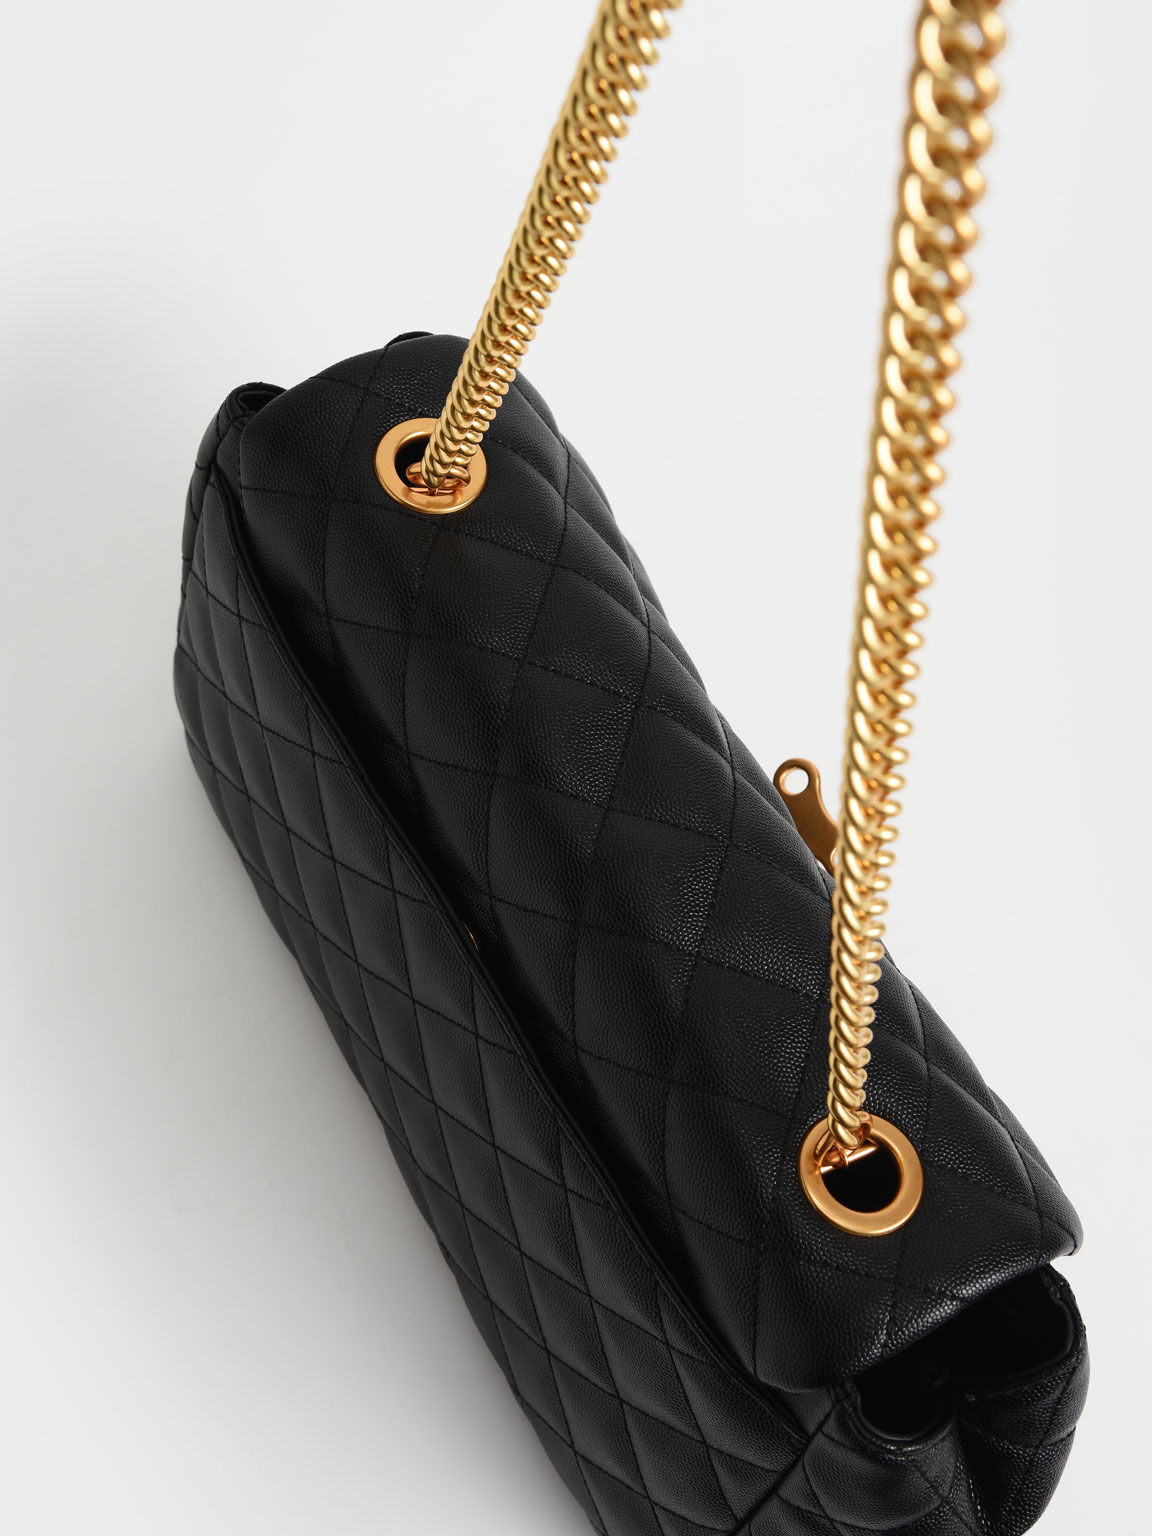 Chain Link Quilted Top Handle Bag, Black, hi-res